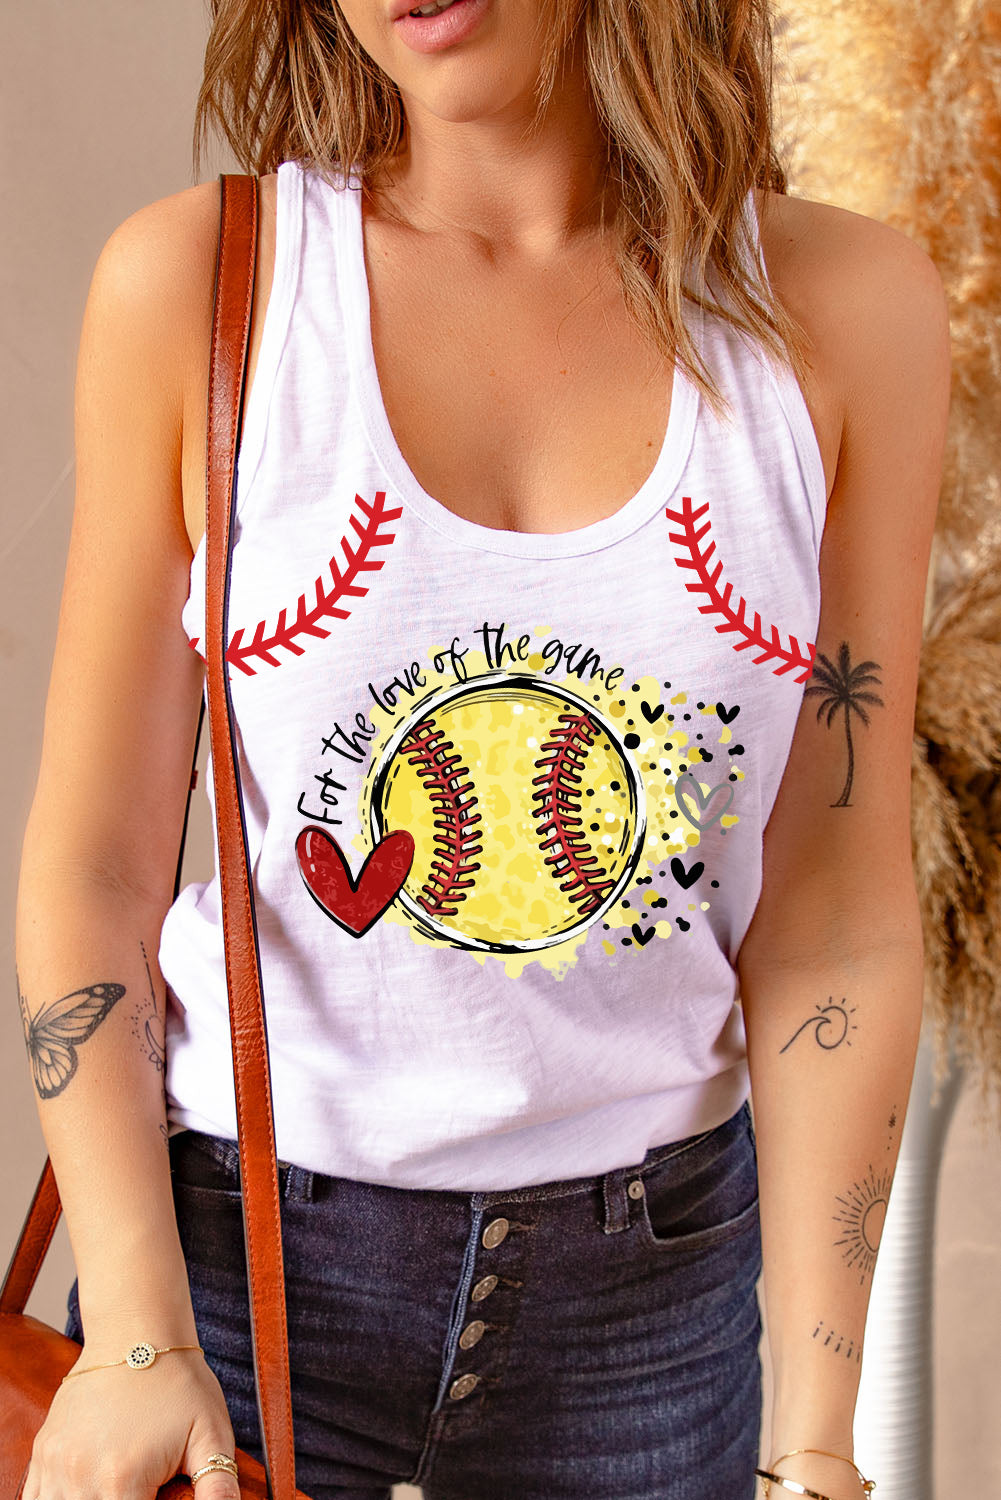 FOR THE LOVE OF THE GAME Graphic Tank